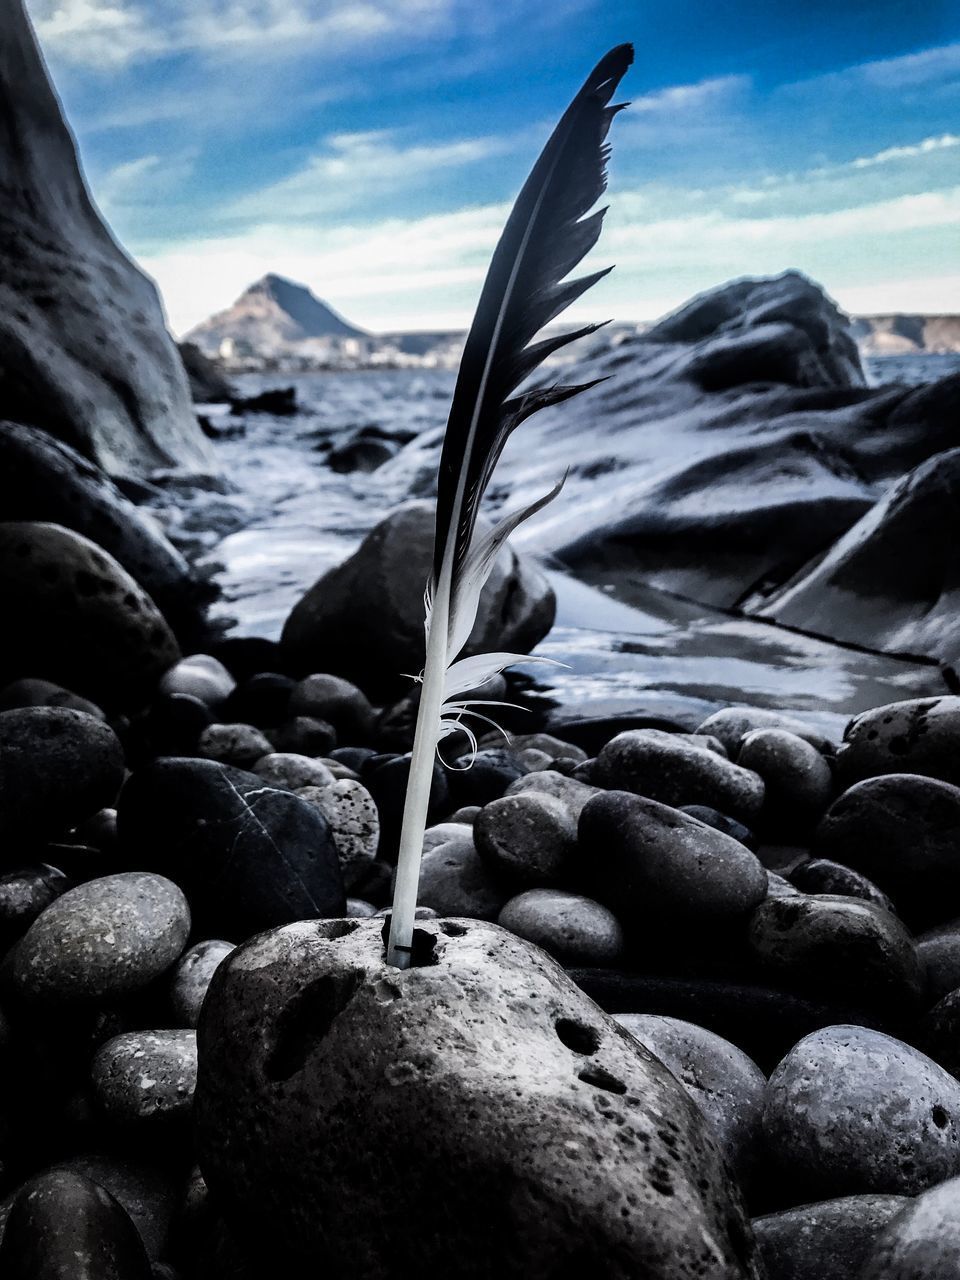 CLOSE-UP OF FEATHER ON ROCKS